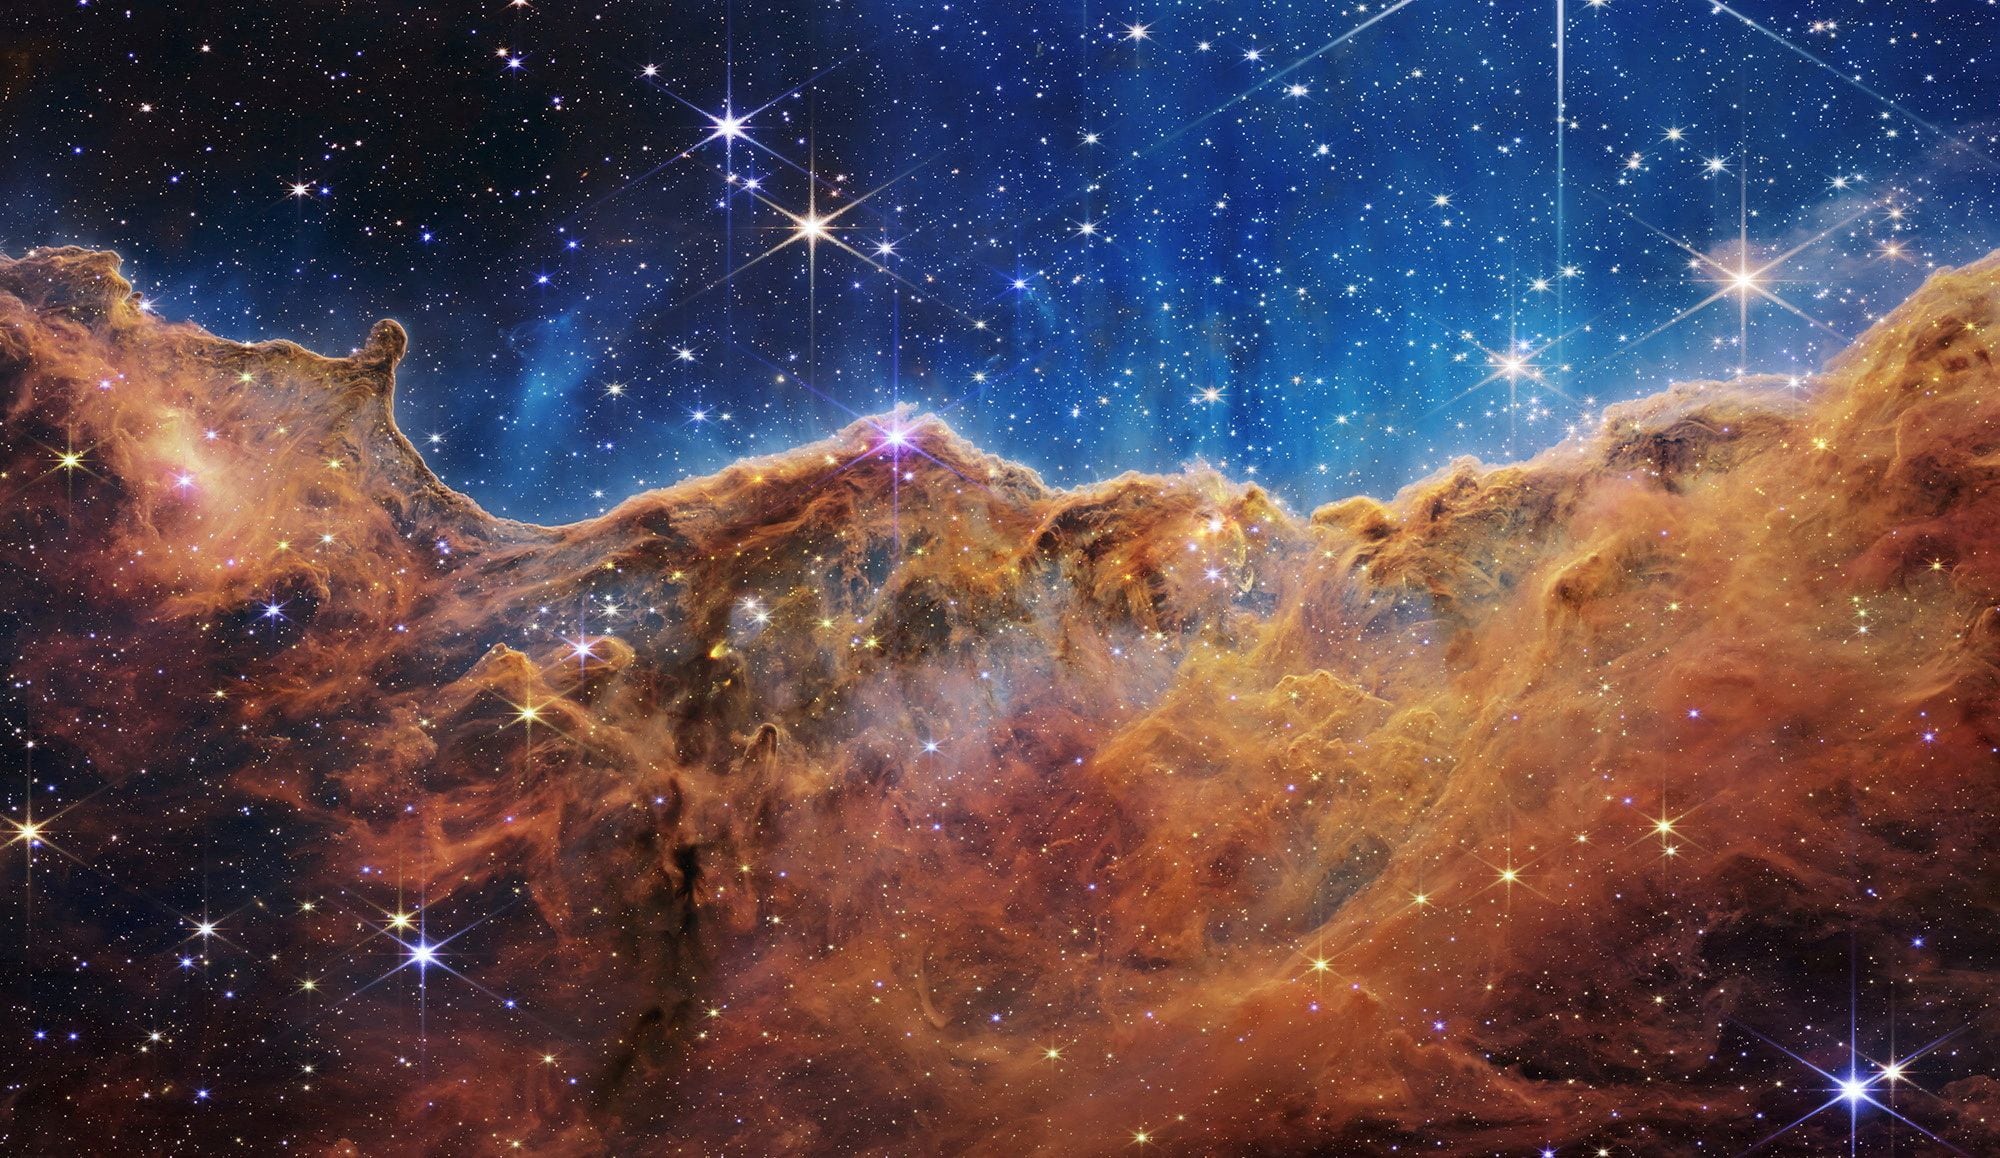 Cosmic slopes in the Carina Nebula, observed by NASA (Reuters)